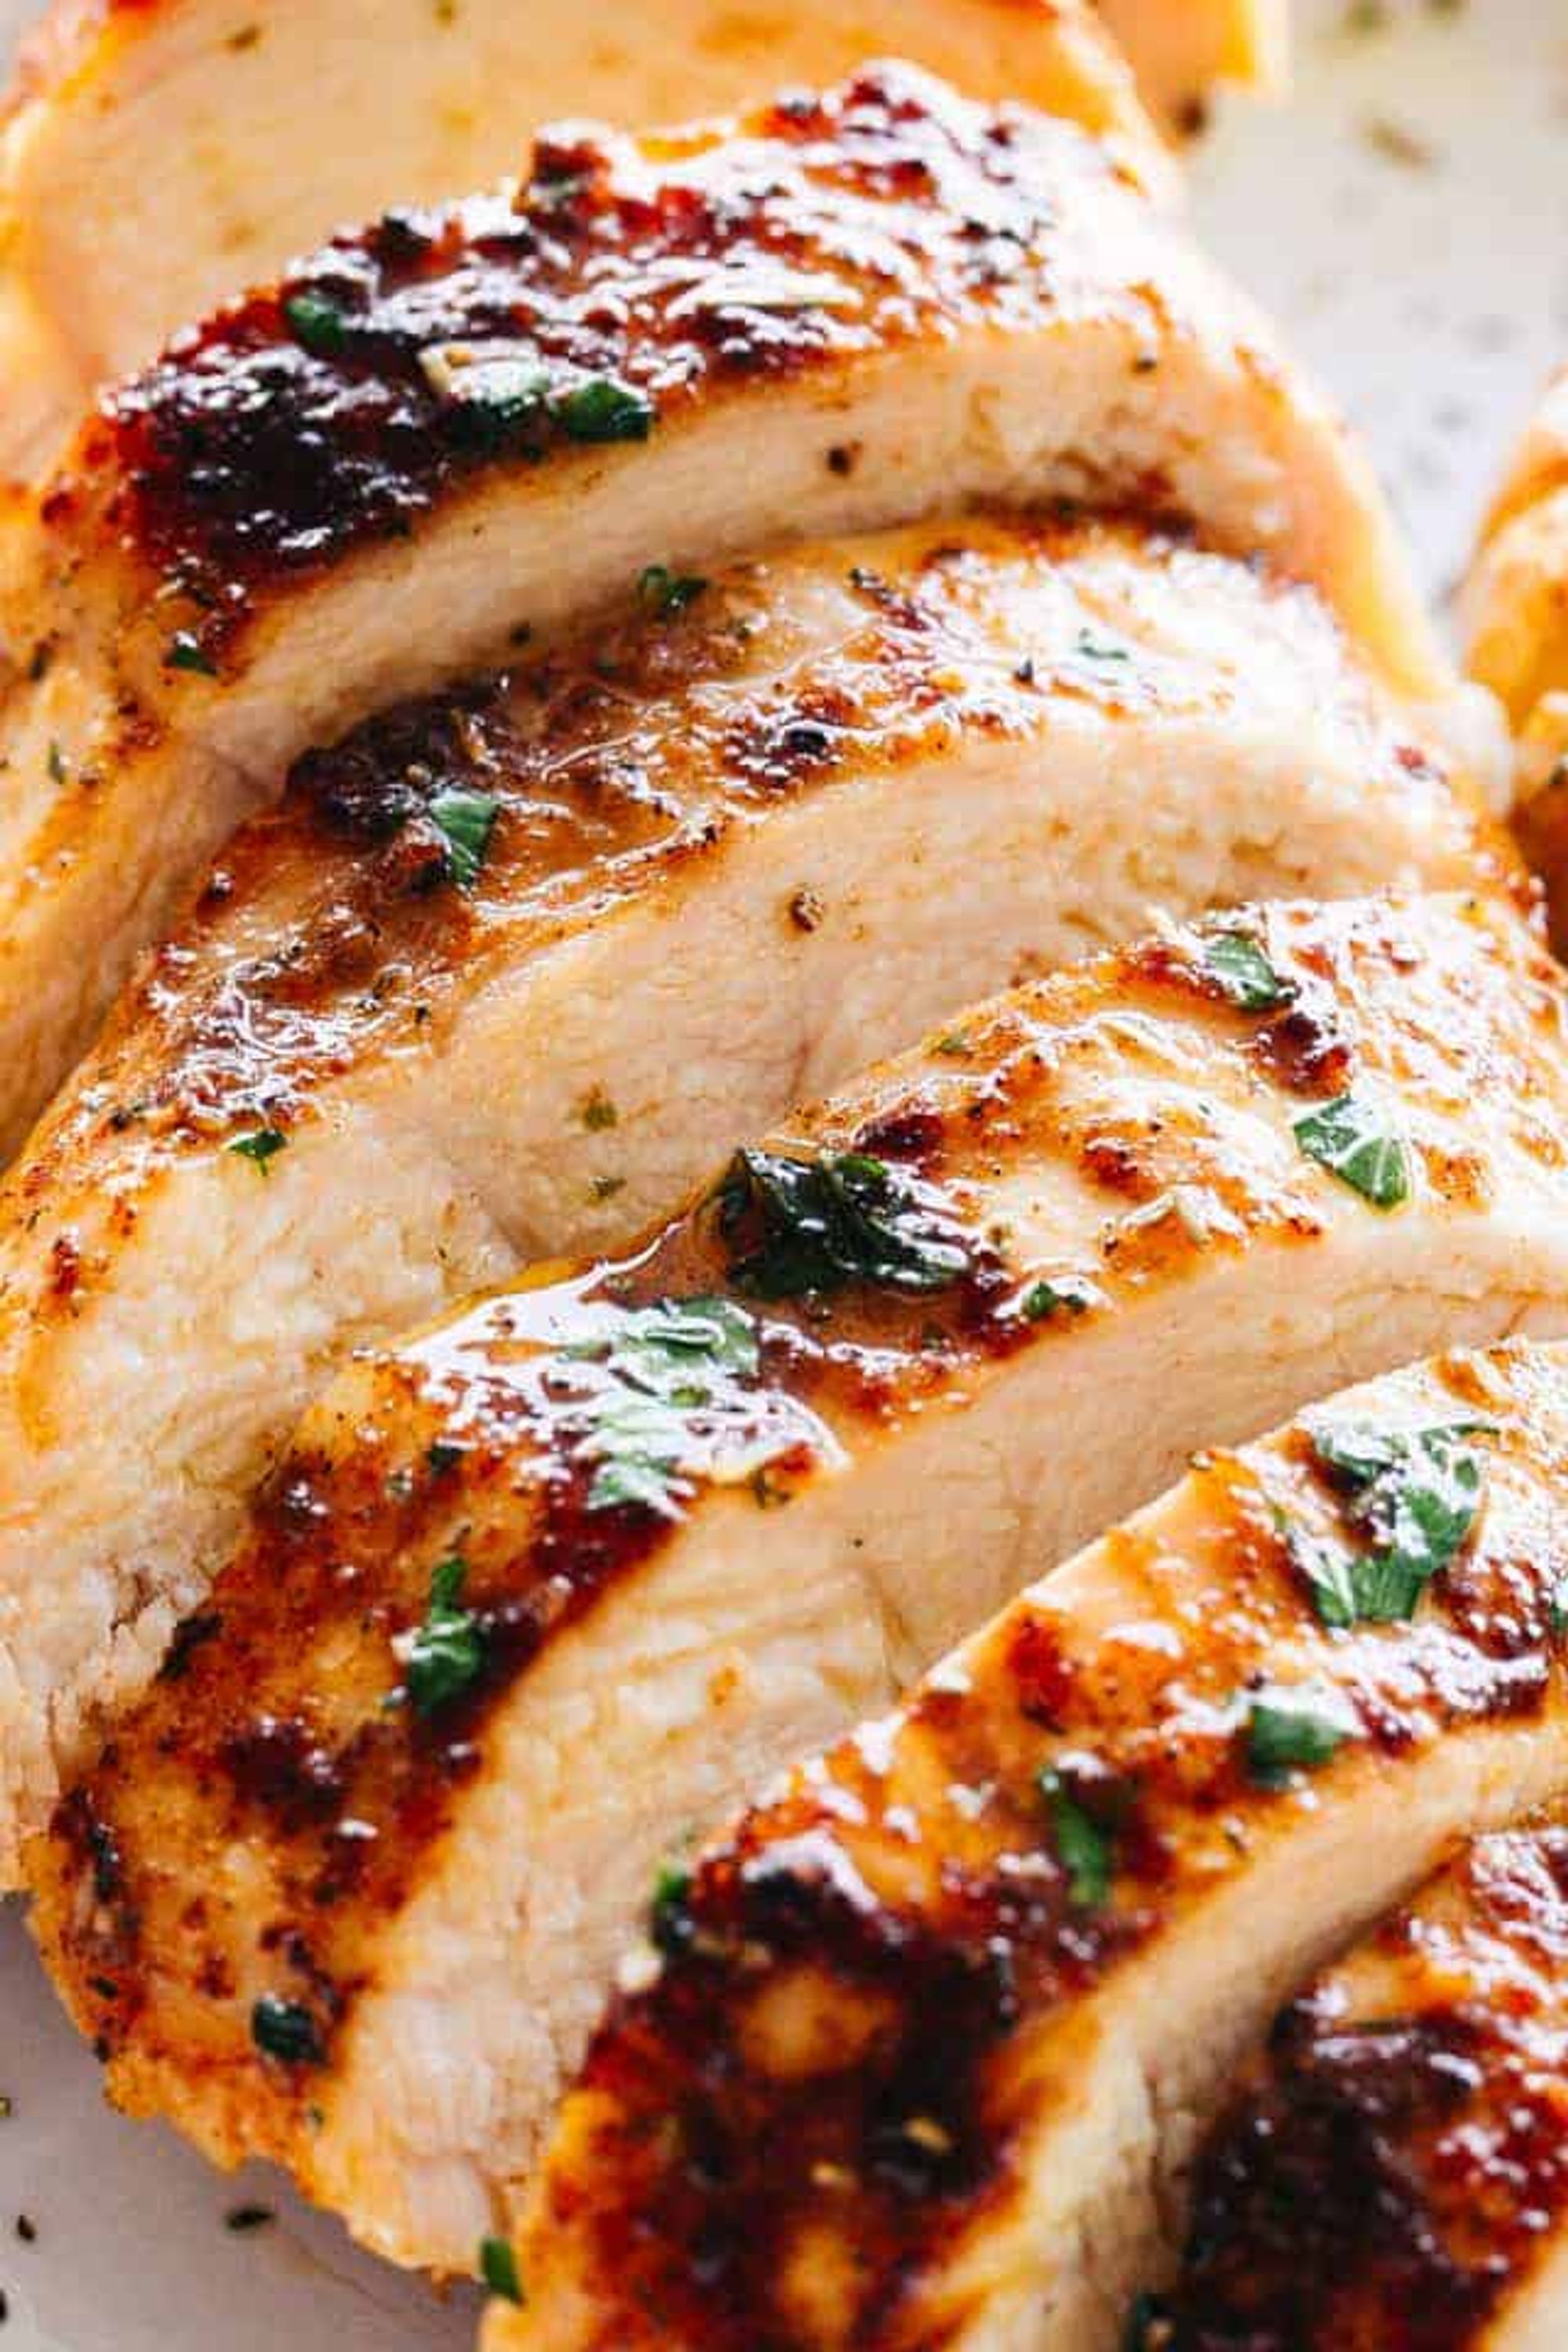 Oven Baked Chicken Breasts Recipe | How to Cook Chicken Breasts - My Recipe Magic